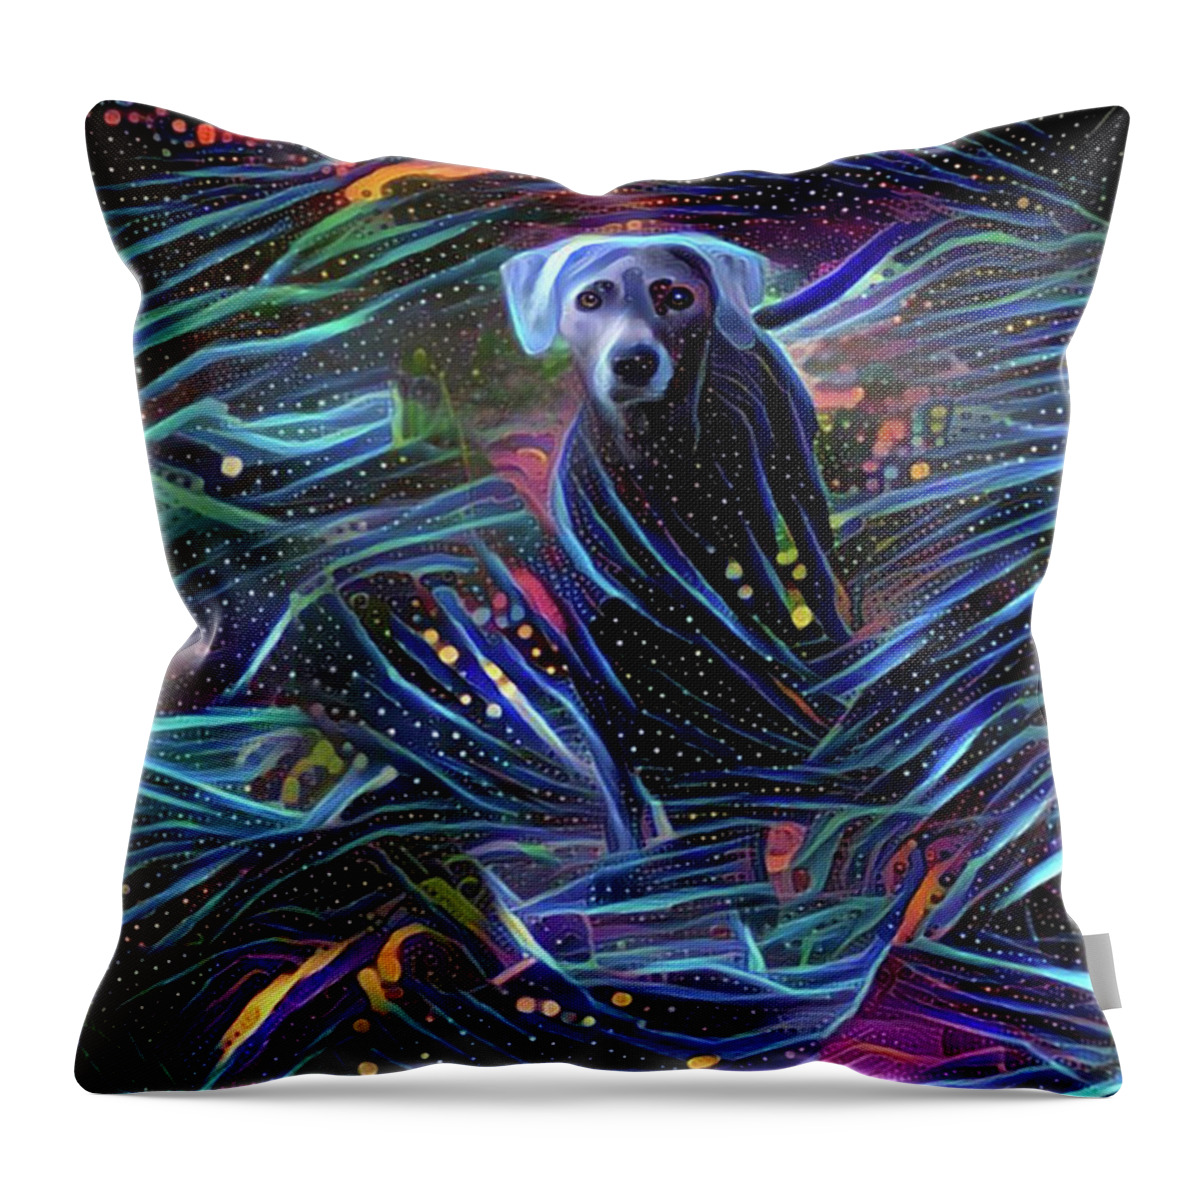 Lacy Dog Throw Pillow featuring the digital art Spacey Lacy by Peggy Collins